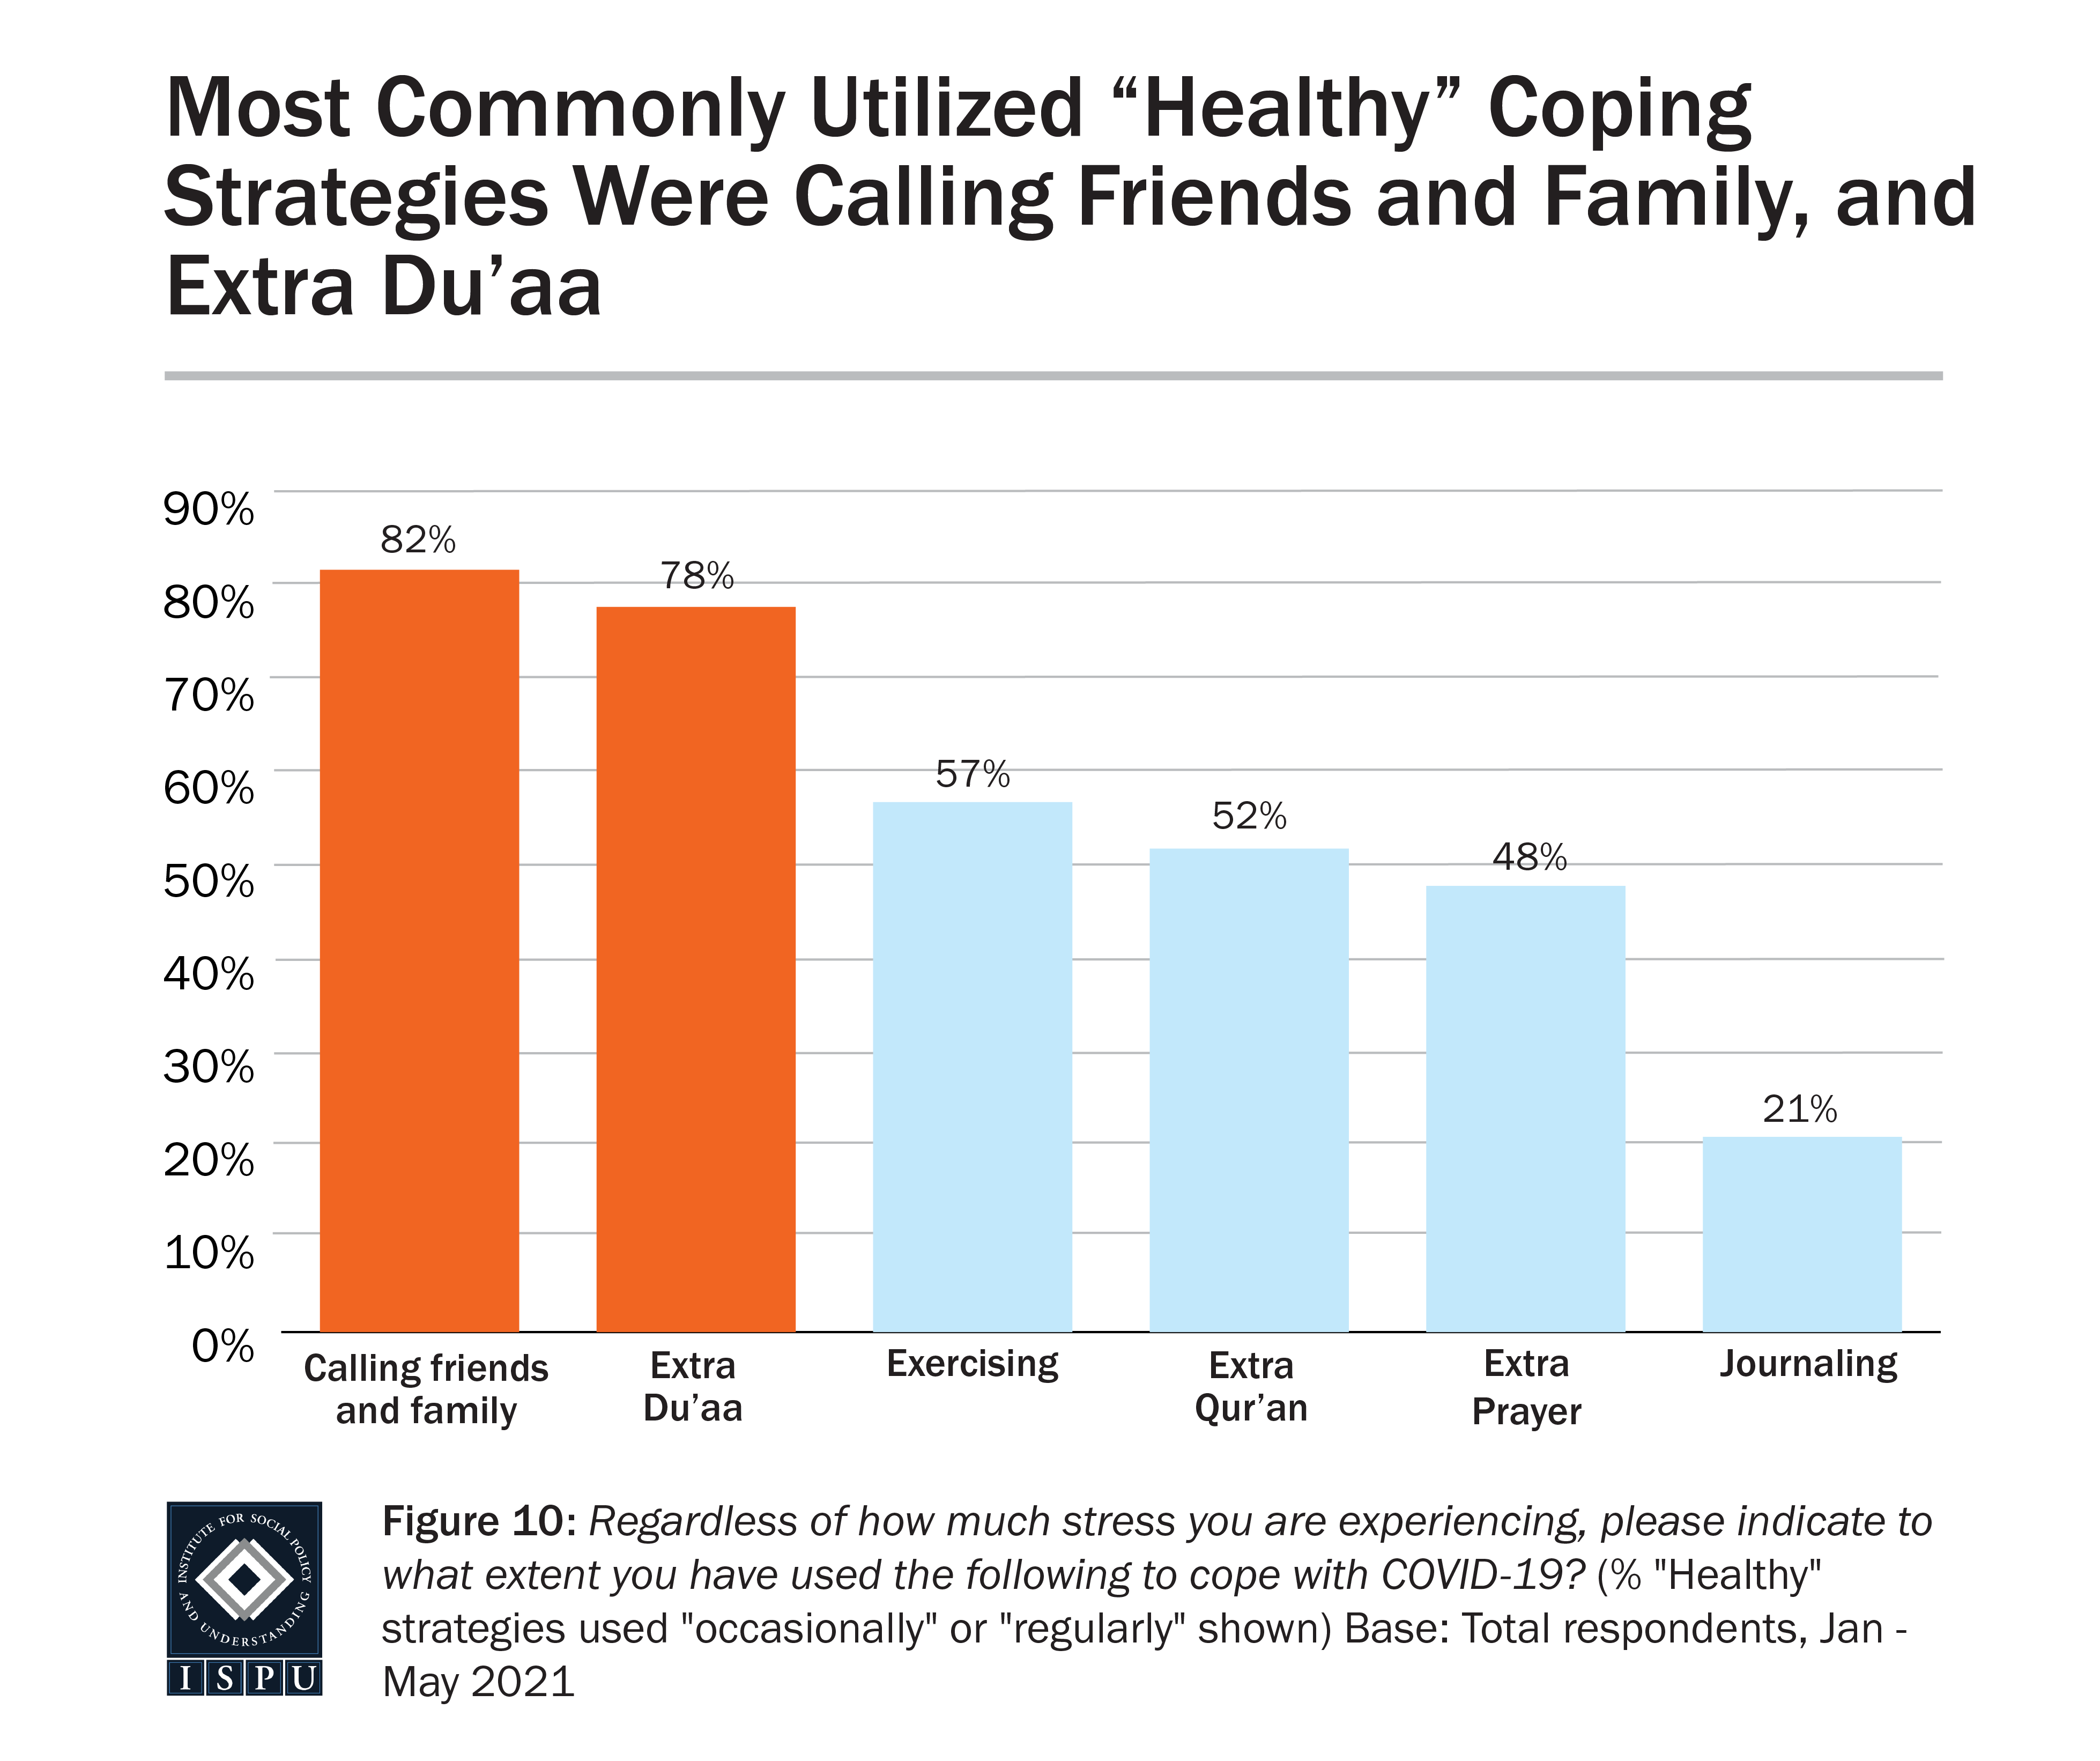 Graph displaying: bar graph of "healthy" coping strategies, with calling friends and family and extra Du'aa being highest ranked